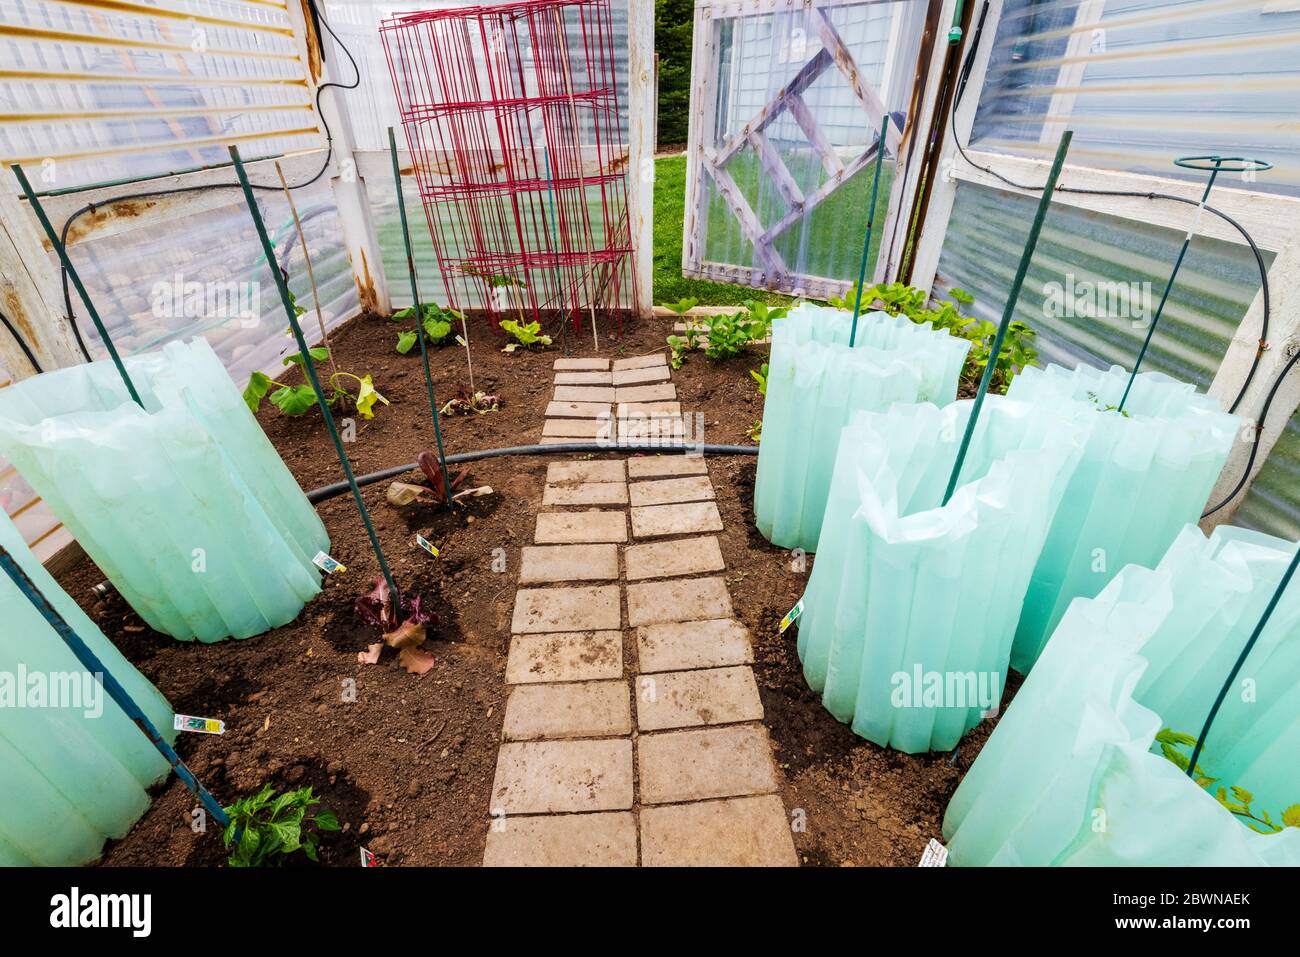 Freshly planted residential vegetable garden. Plastic water walls retain daytime heat in cool evenings. Stock Photo